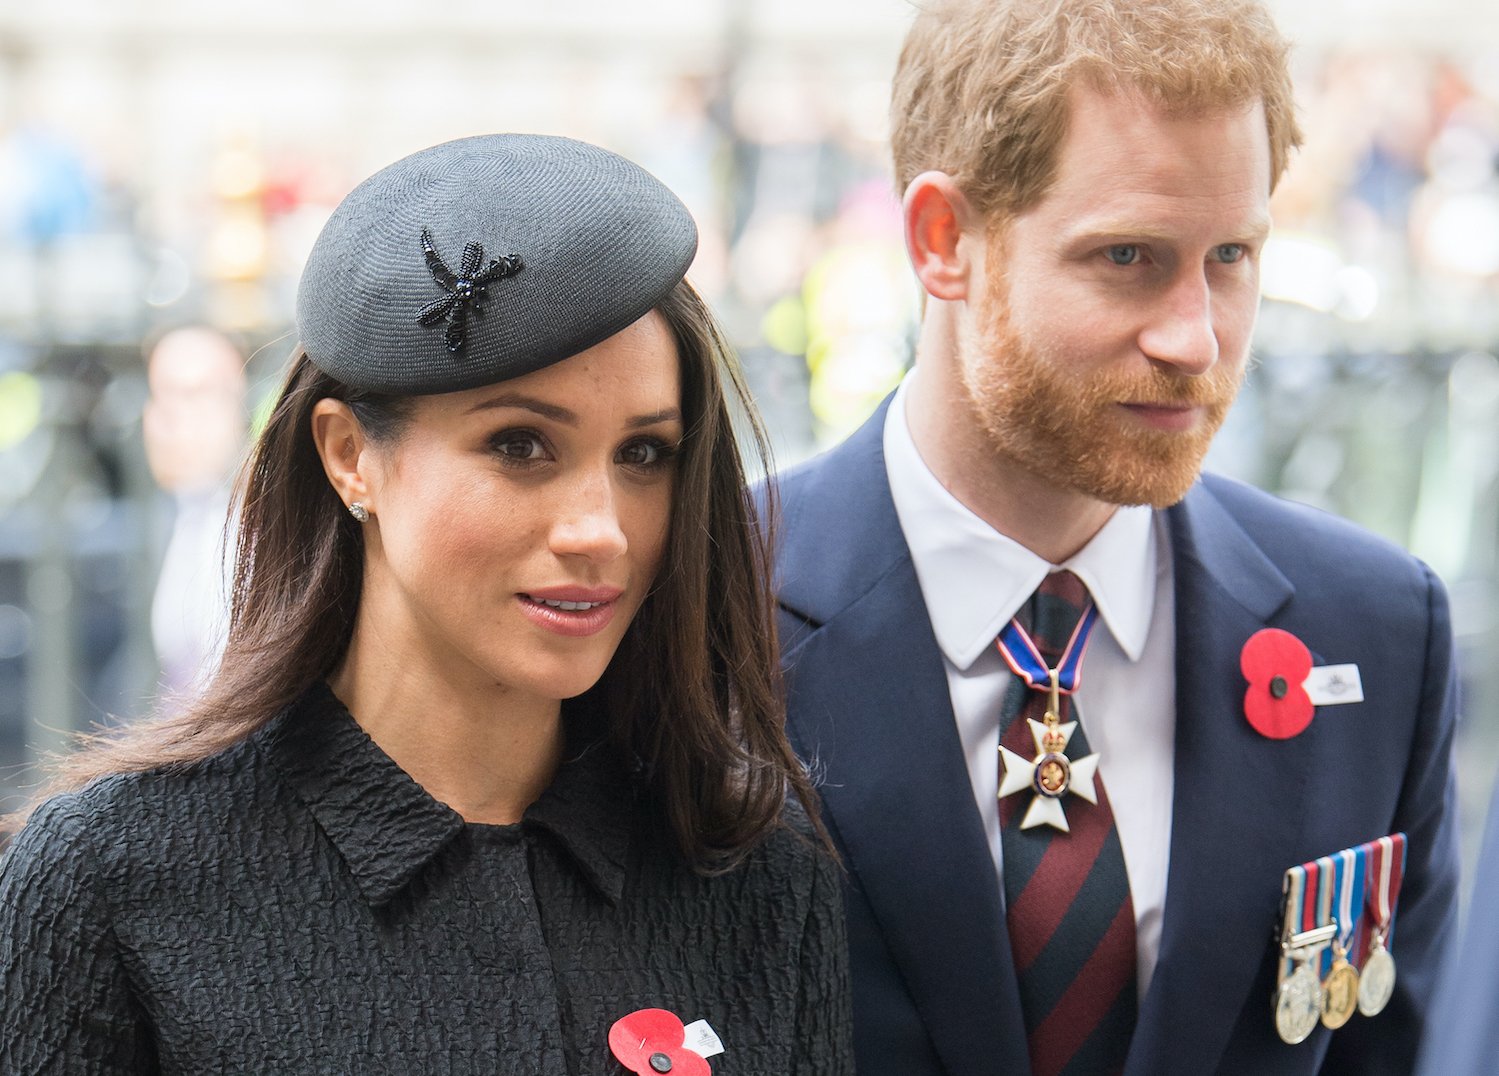 Meghan Markle wearing a black beret next to Prince Harry in a suit with medal decorations